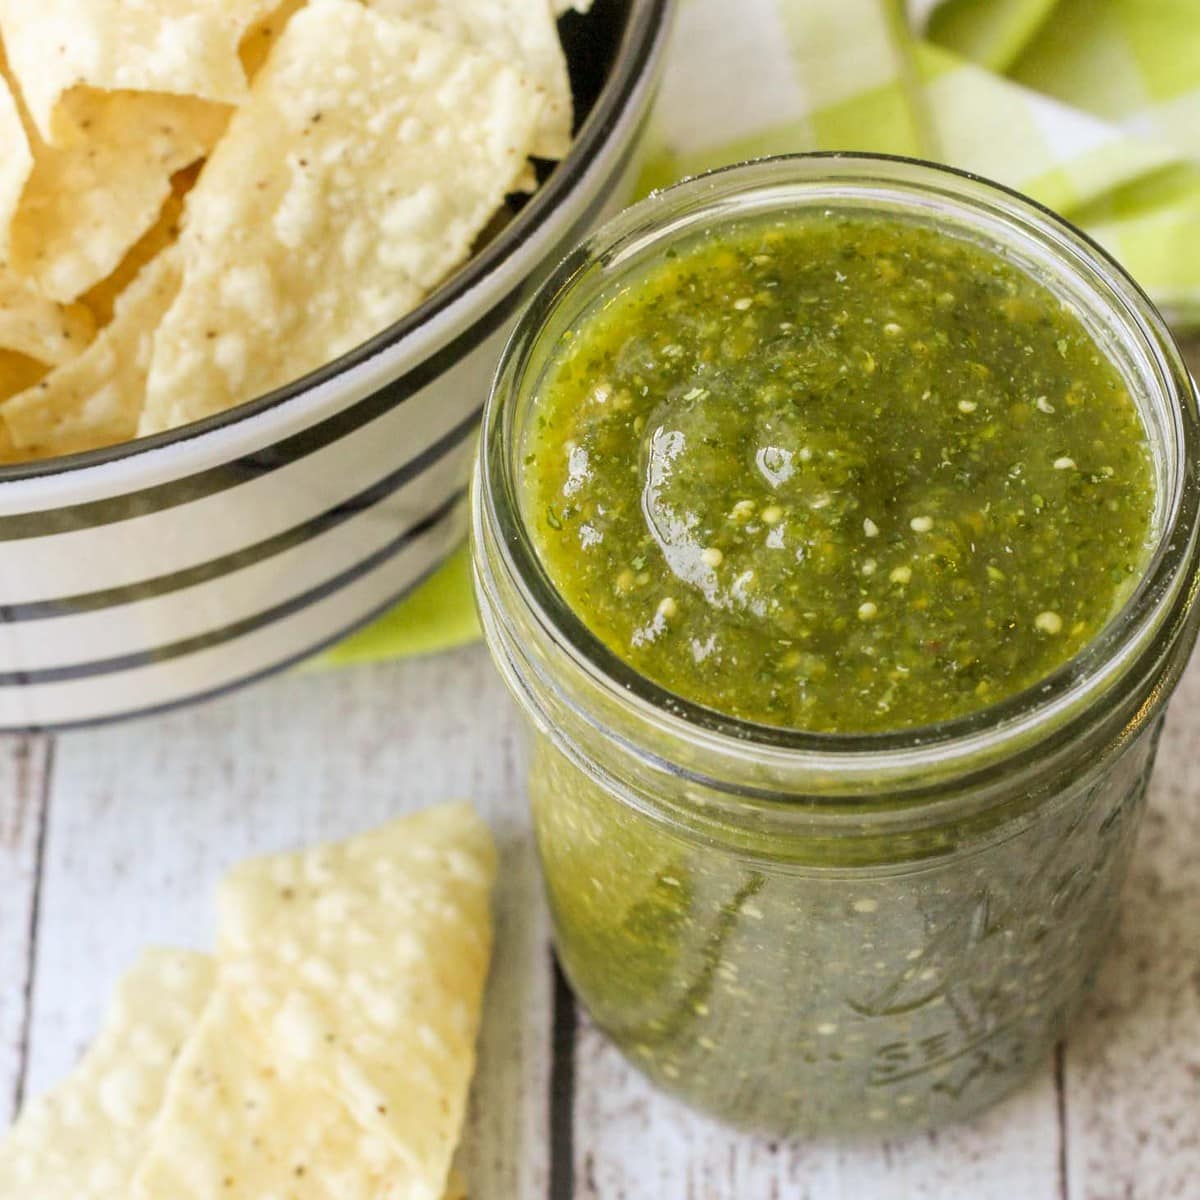 Cold appetizers - a jar of salsa verde served with tortilla chips.